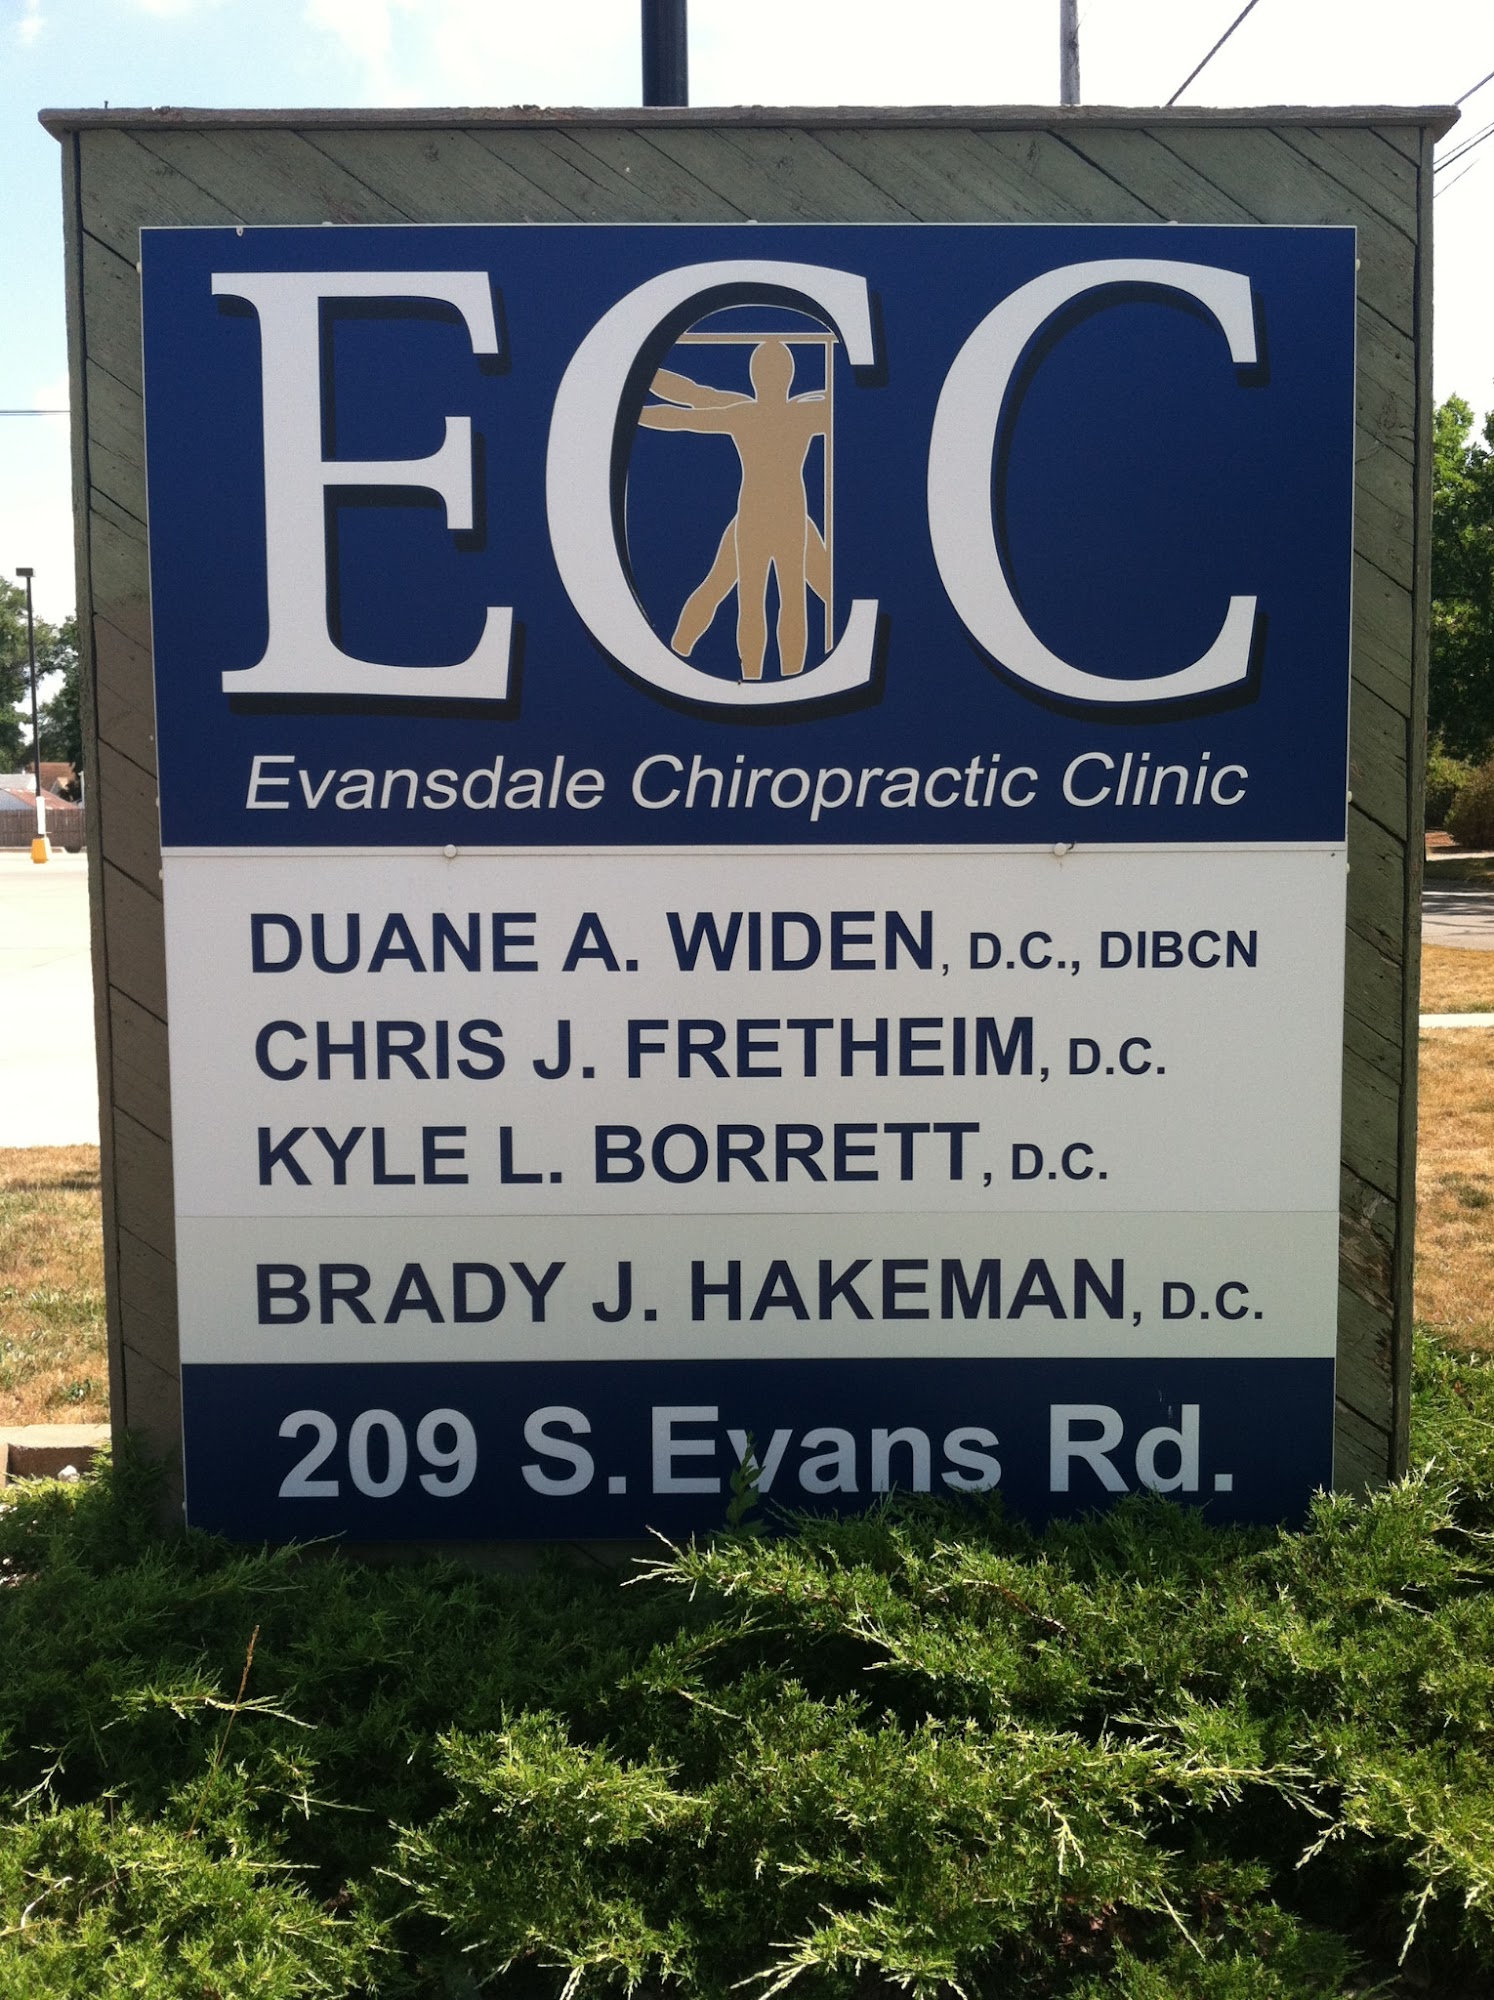 Evansdale Chiropractic Clinic 209 S Evans Rd, Evansdale Iowa 50707